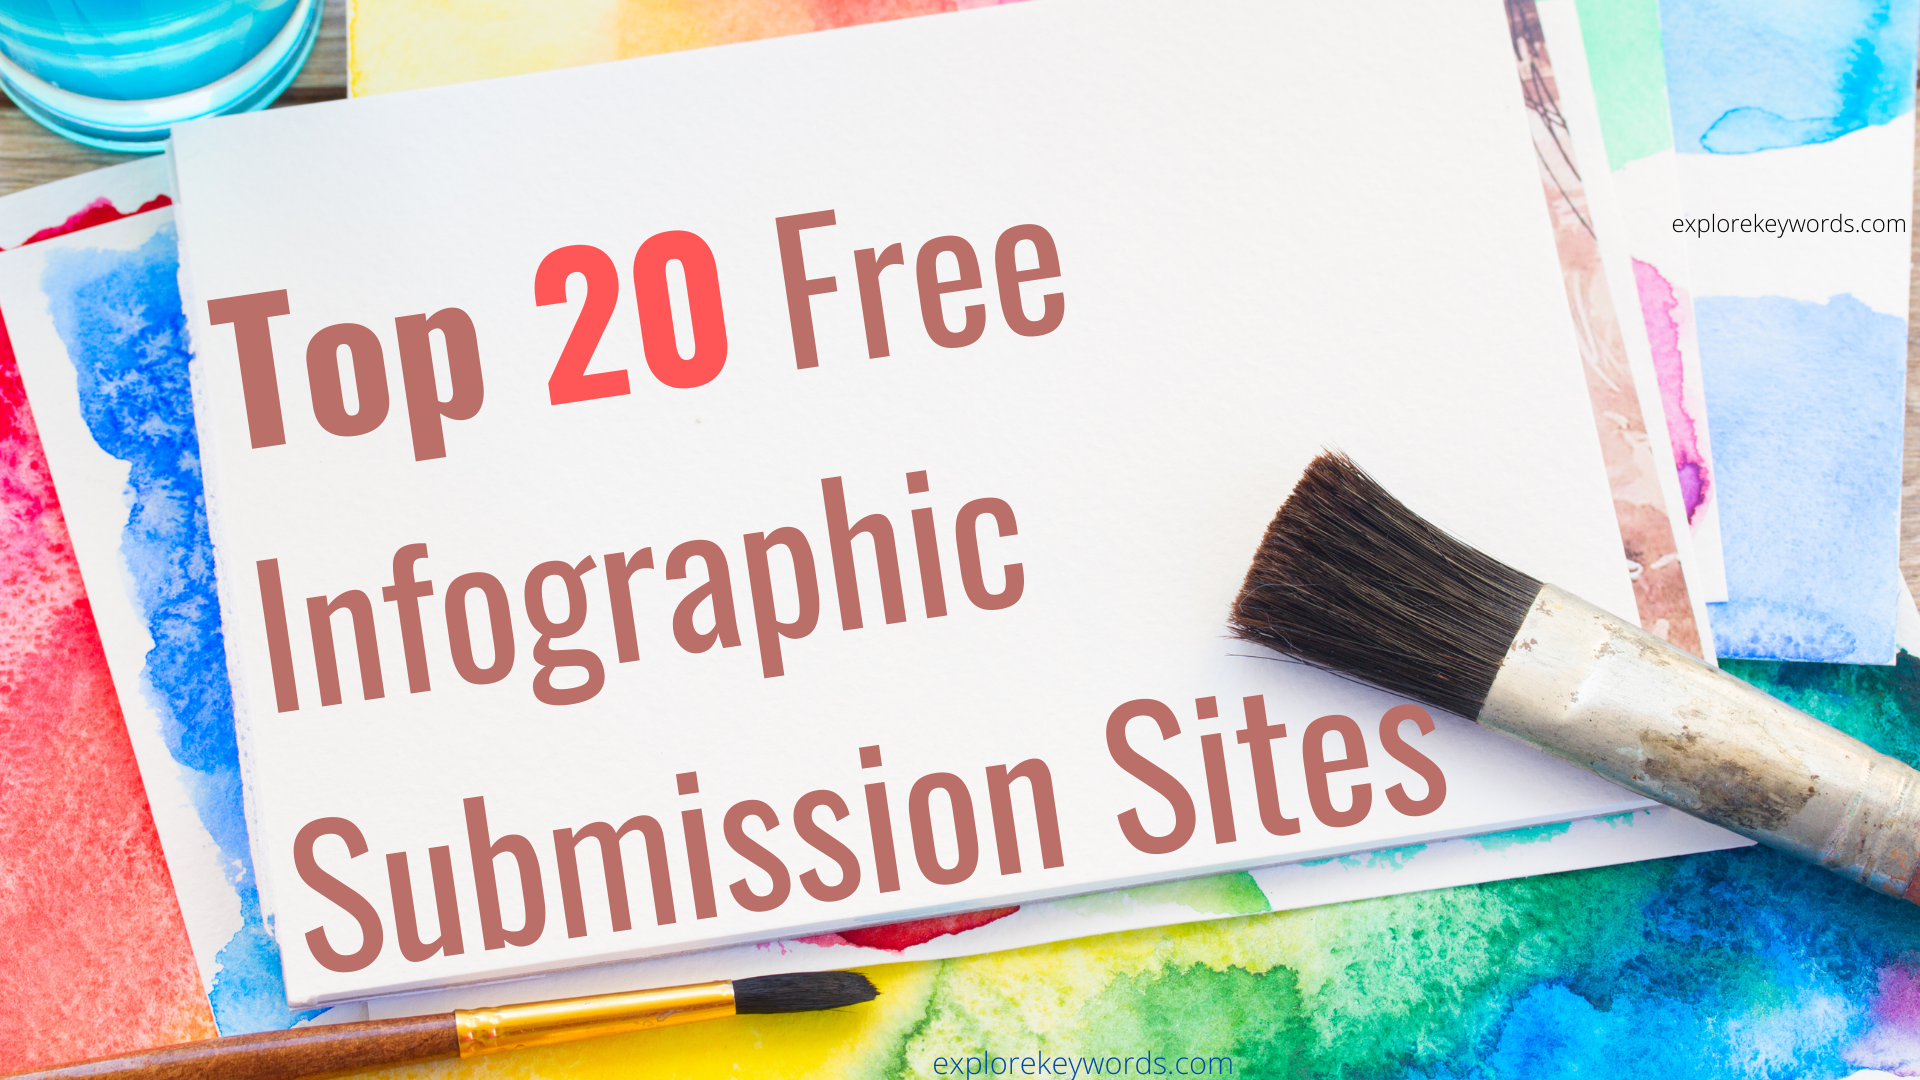 Top 20 Free Infographic Submission Sites